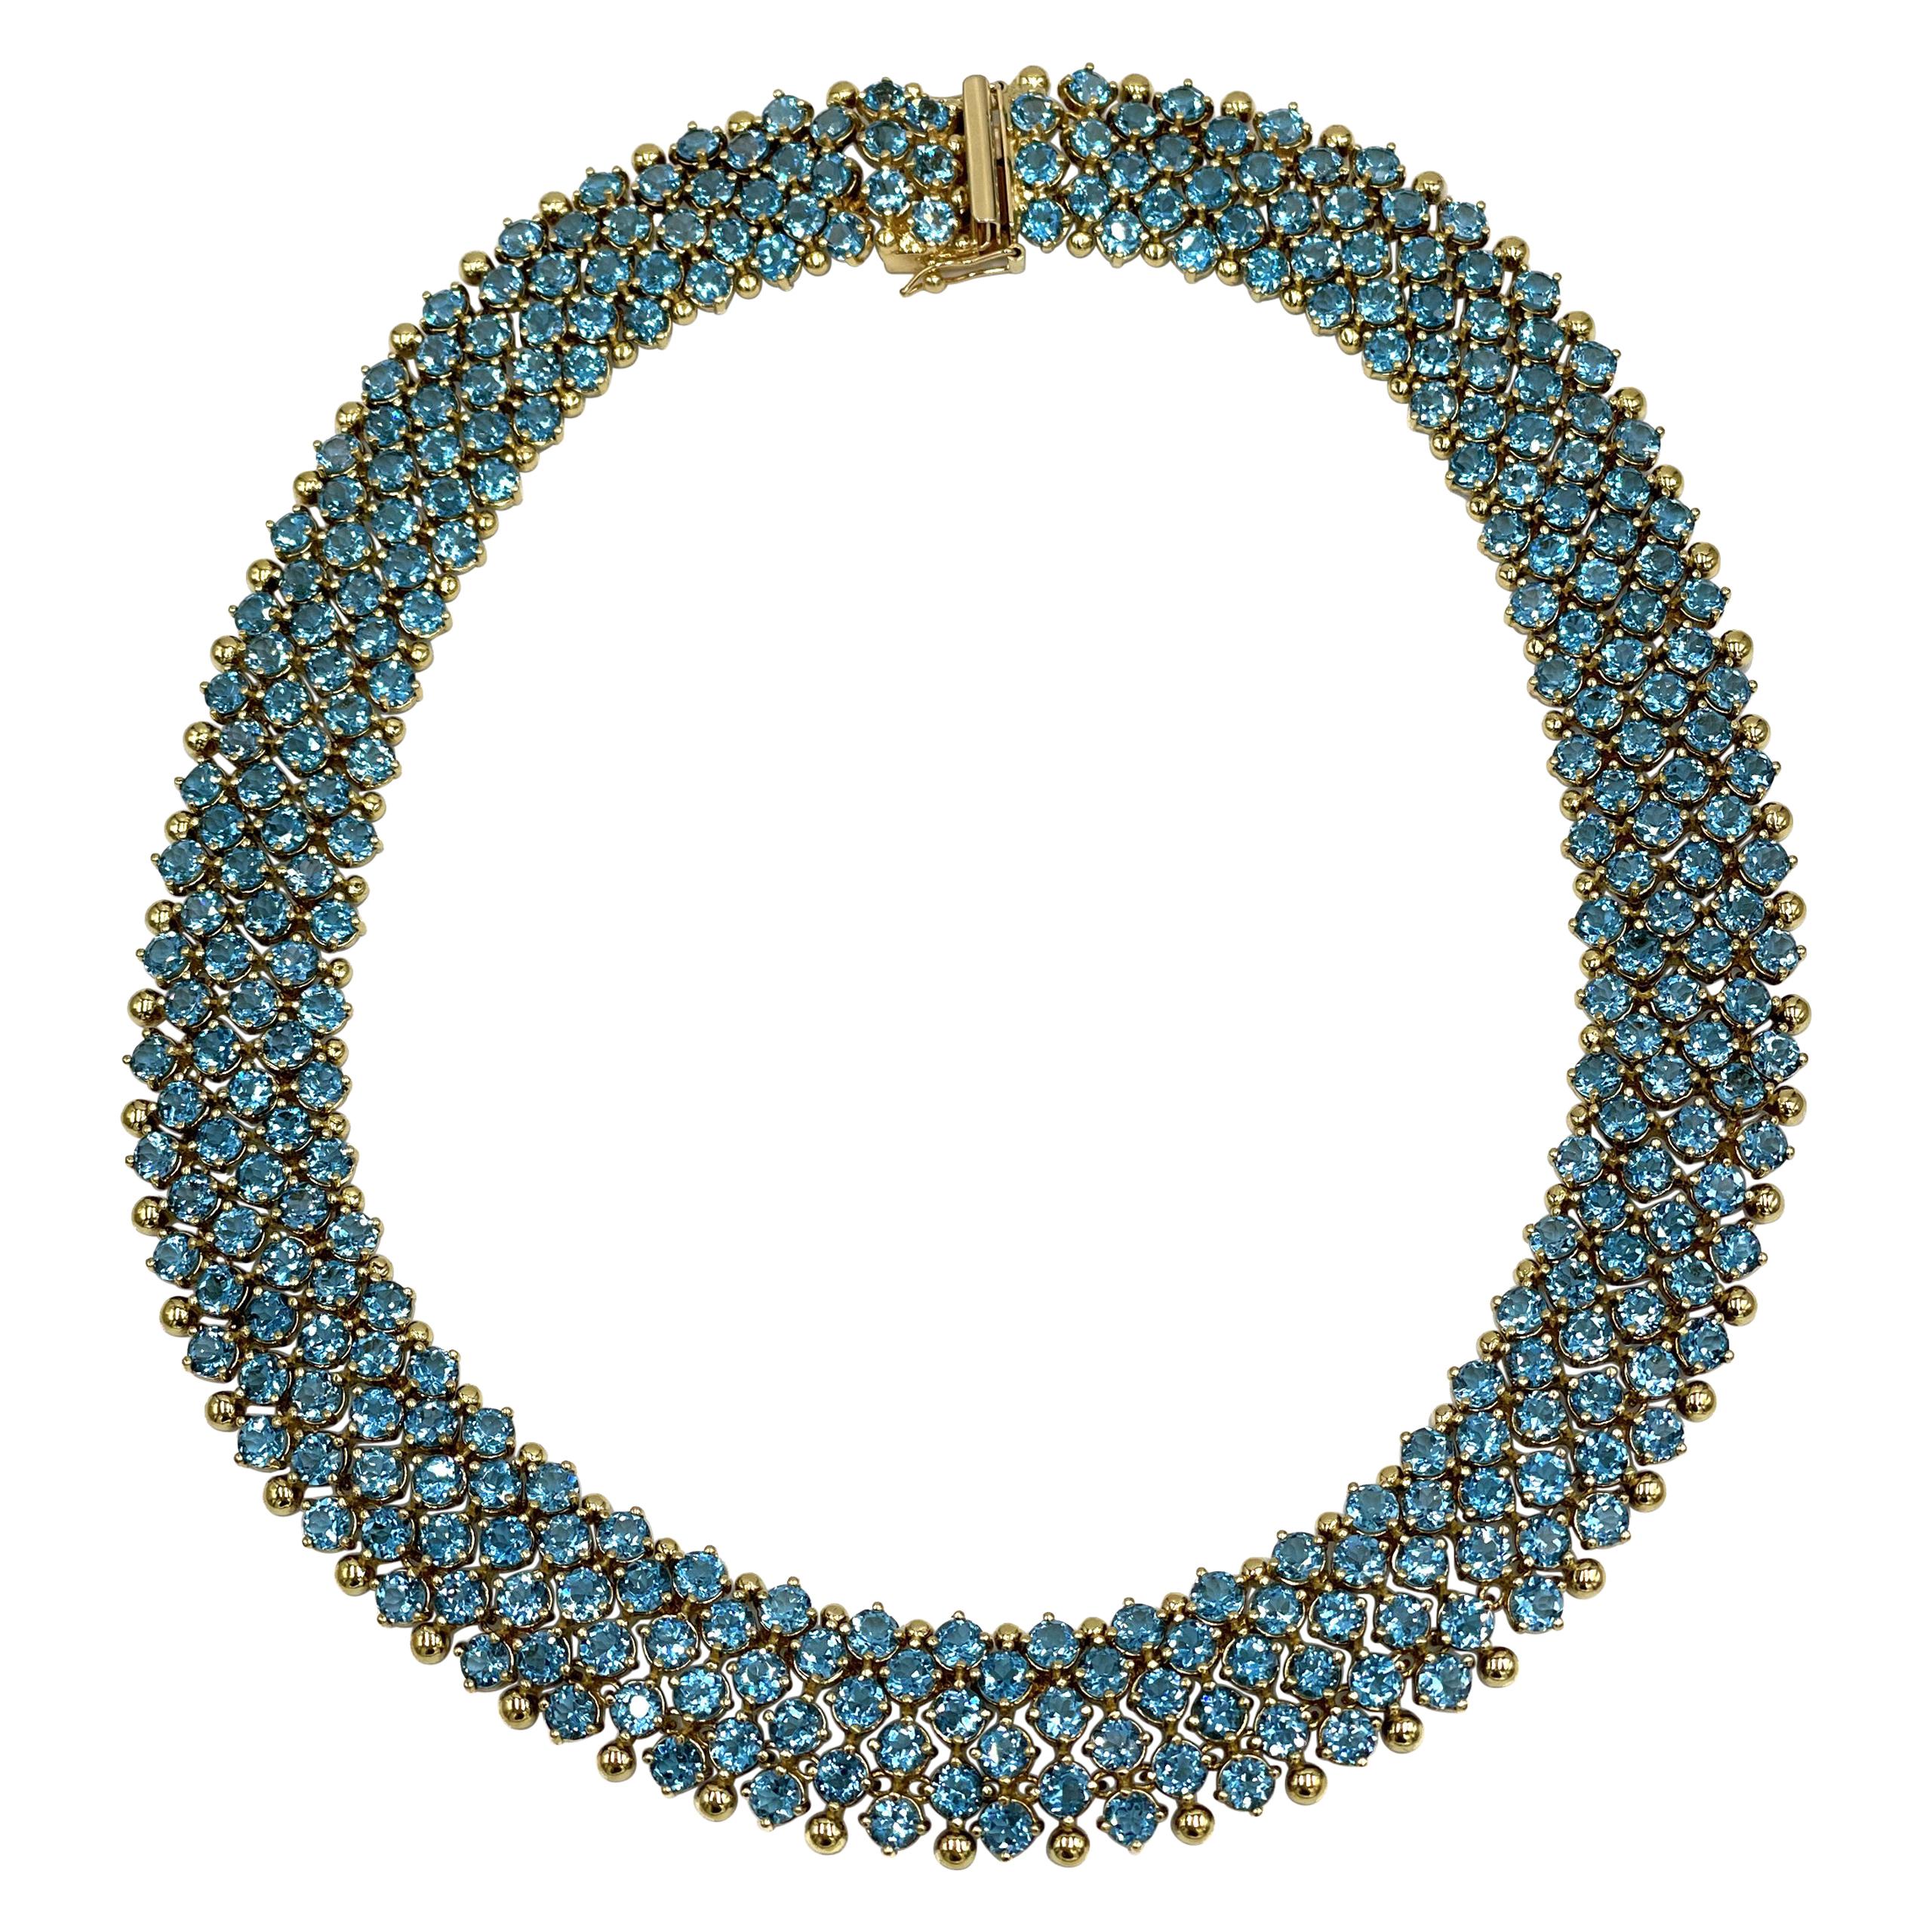 Exquisite 18k Collar Necklace with Blue Topaz